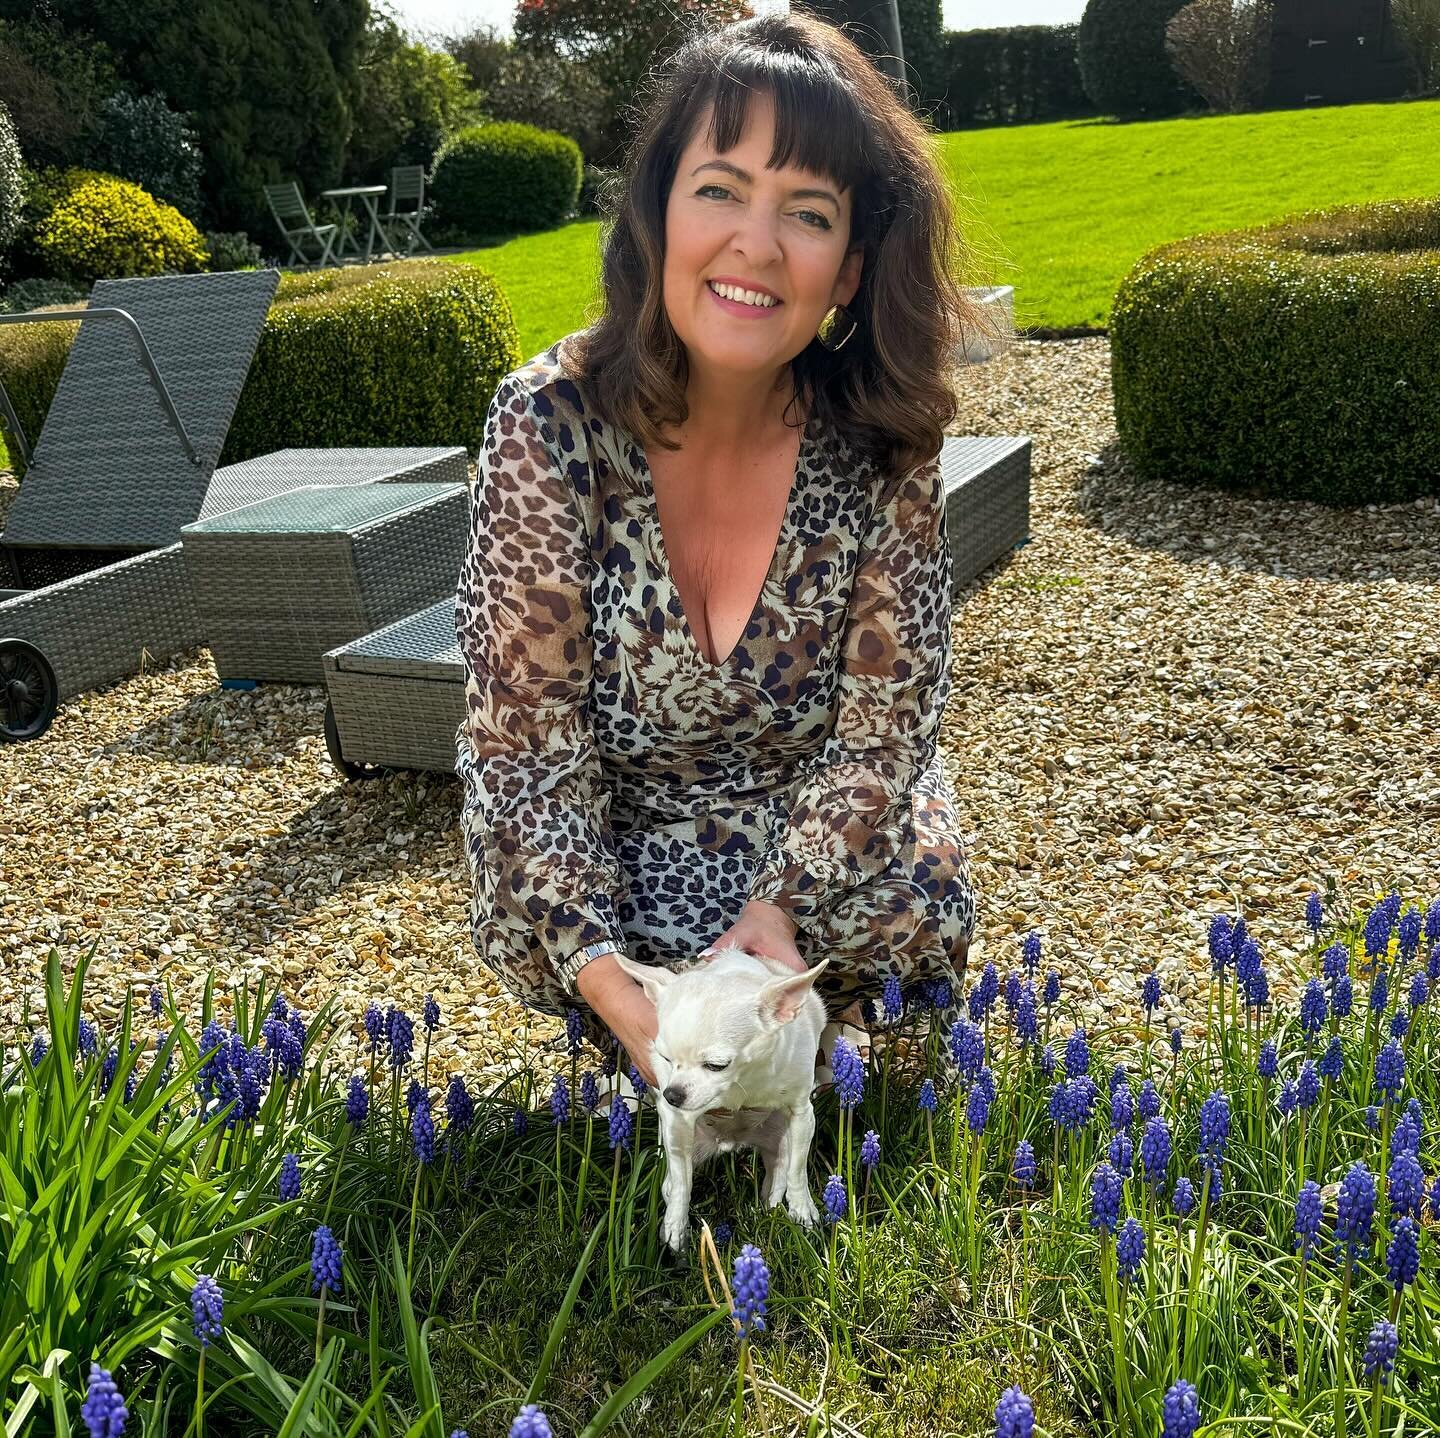 Hope you all have a fabulous Easter weekend, however you celebrate!  Love Kim &amp; Marilyn 🐾 x

#klslater #klslaterauthor #nottingham #chihuahuasofinstagram #easter